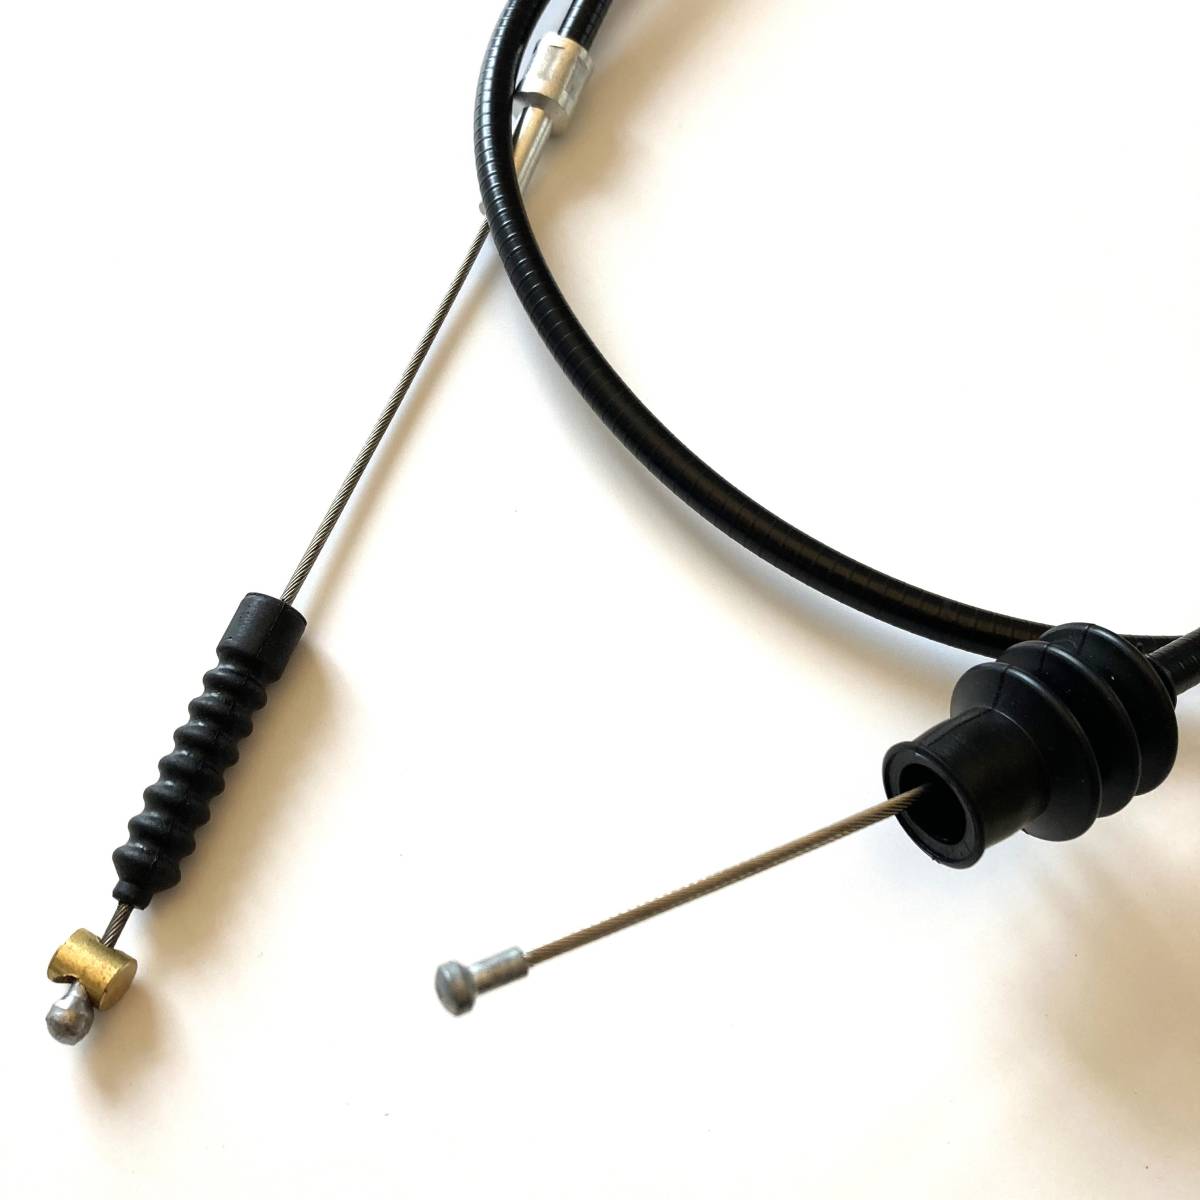 BMW light weight clutch wire clutch cable GS RT high handlebar for R100GS R100R Mystic R100RT R80GS R80g/s R80RT